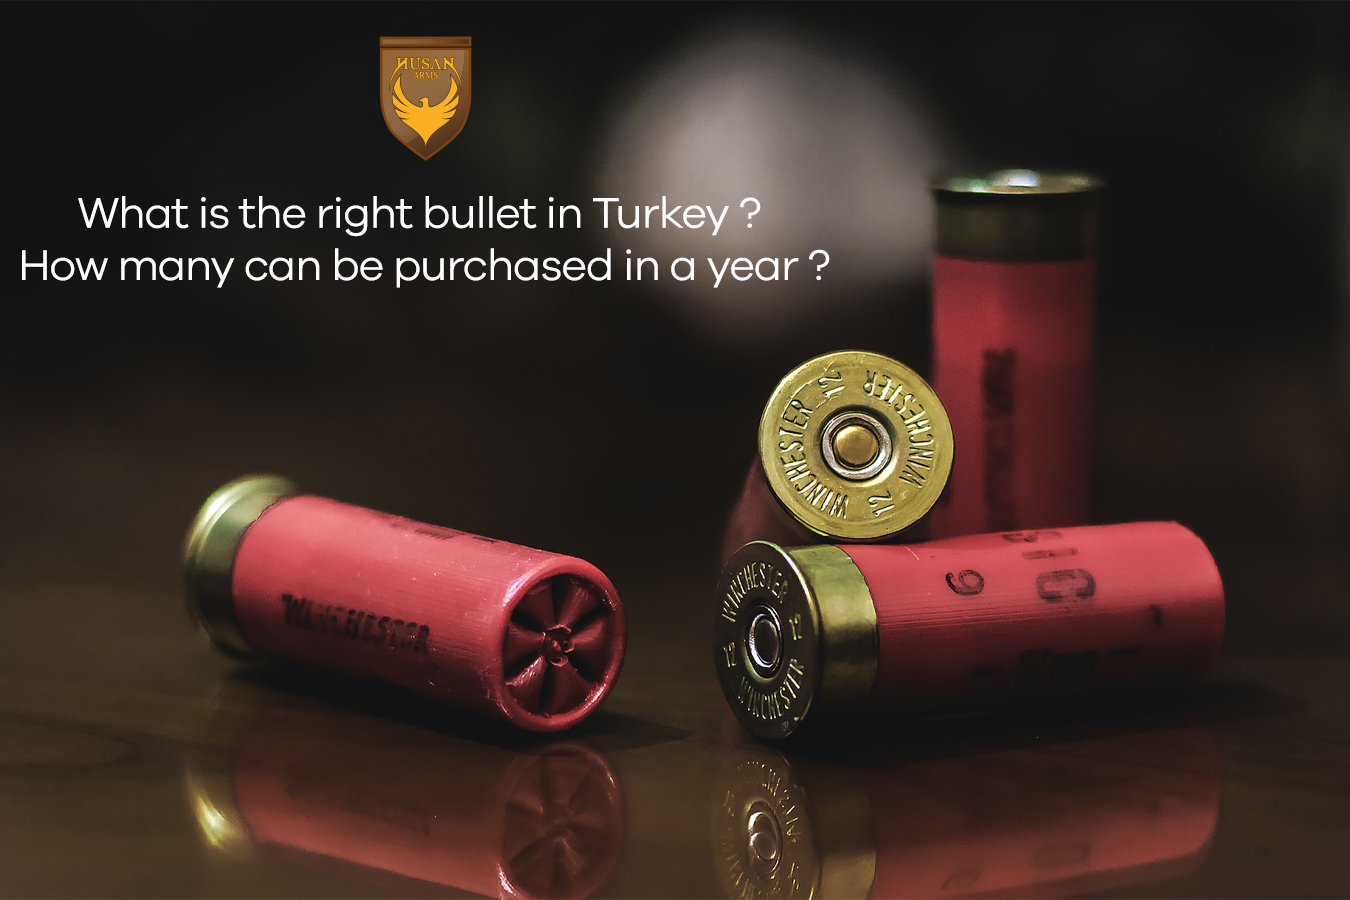 What is the right bullet in Turkey? 